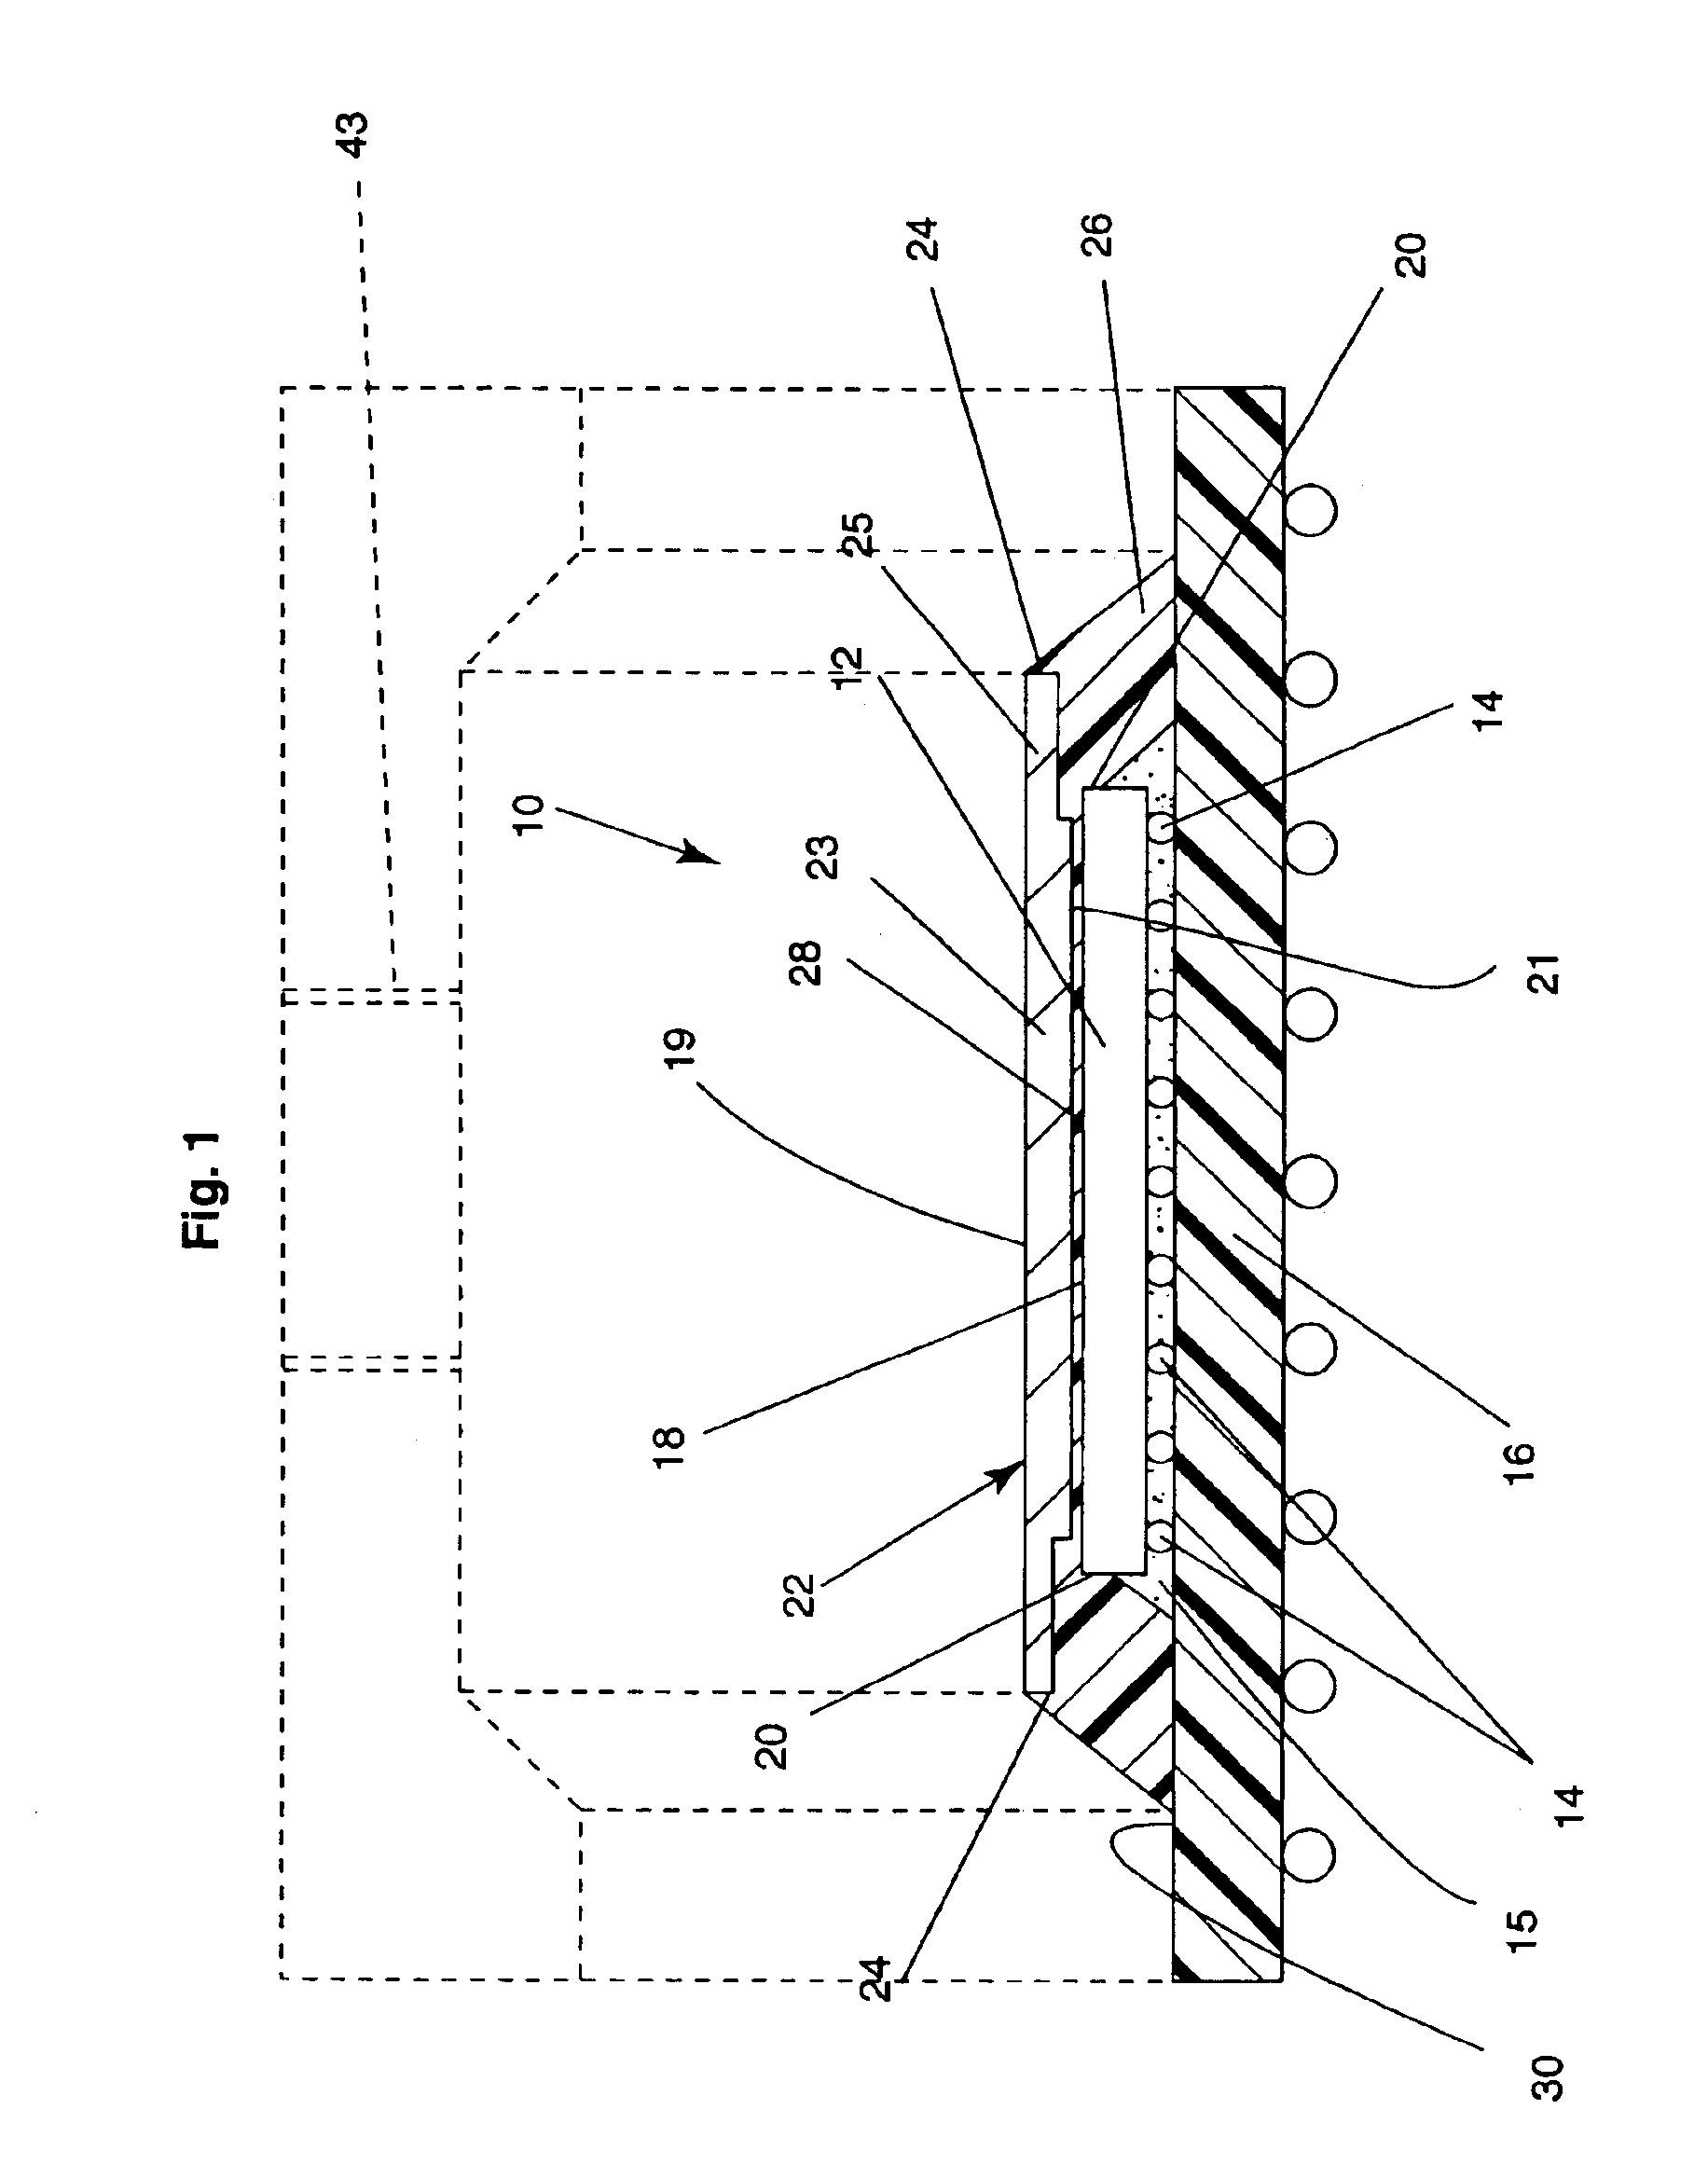 Electronic package and method of forming